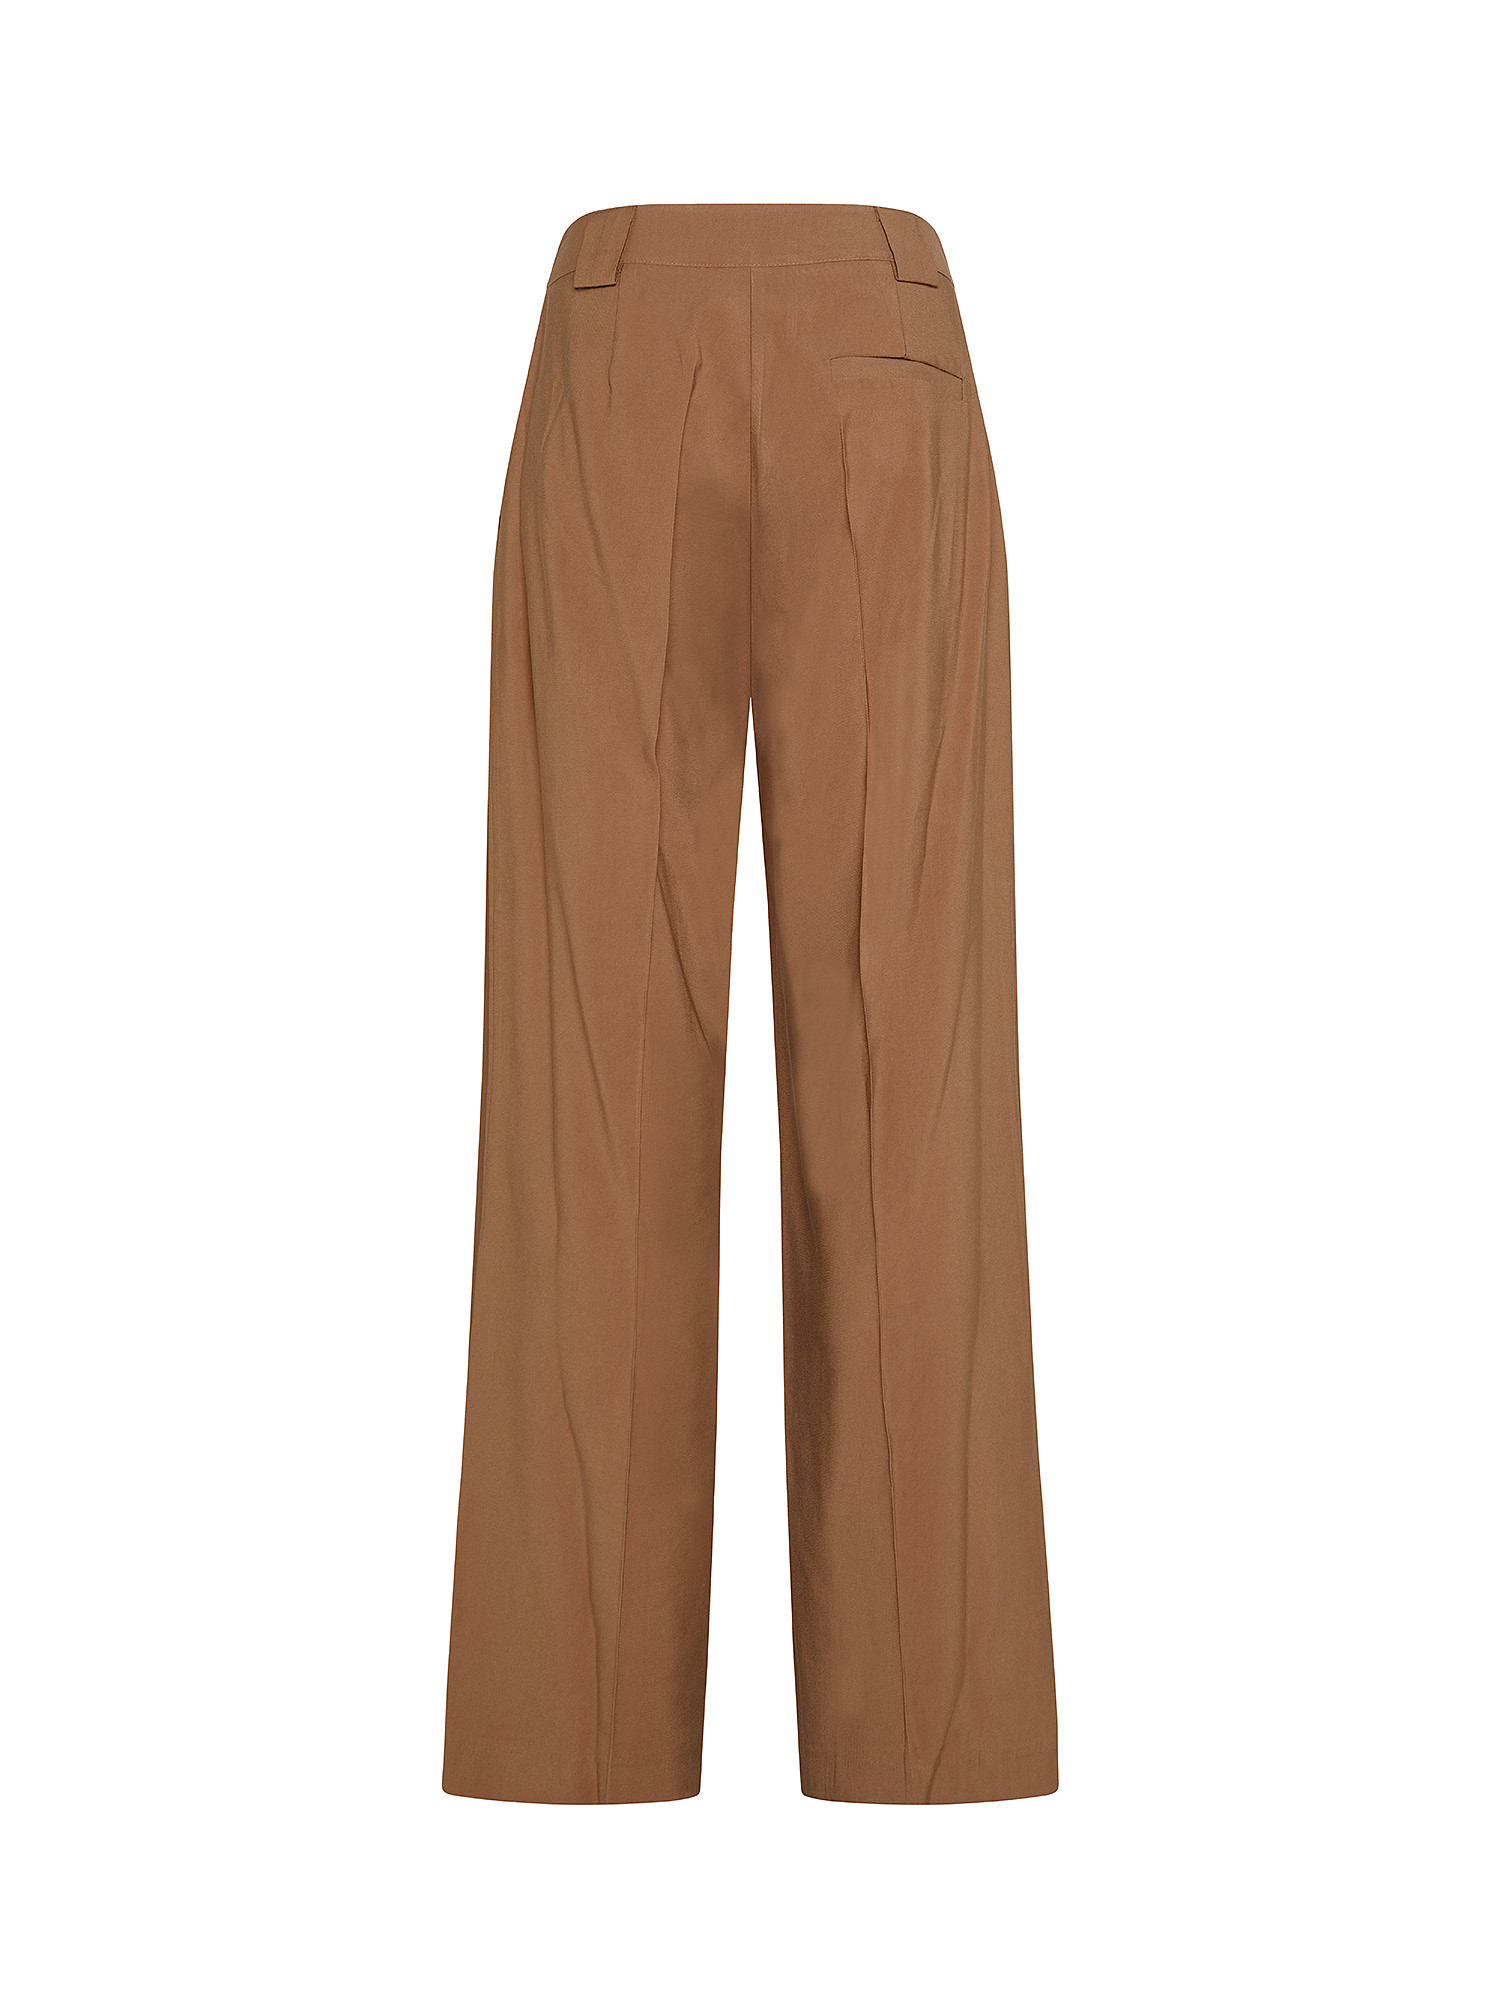 Trousers, Brown, large image number 1